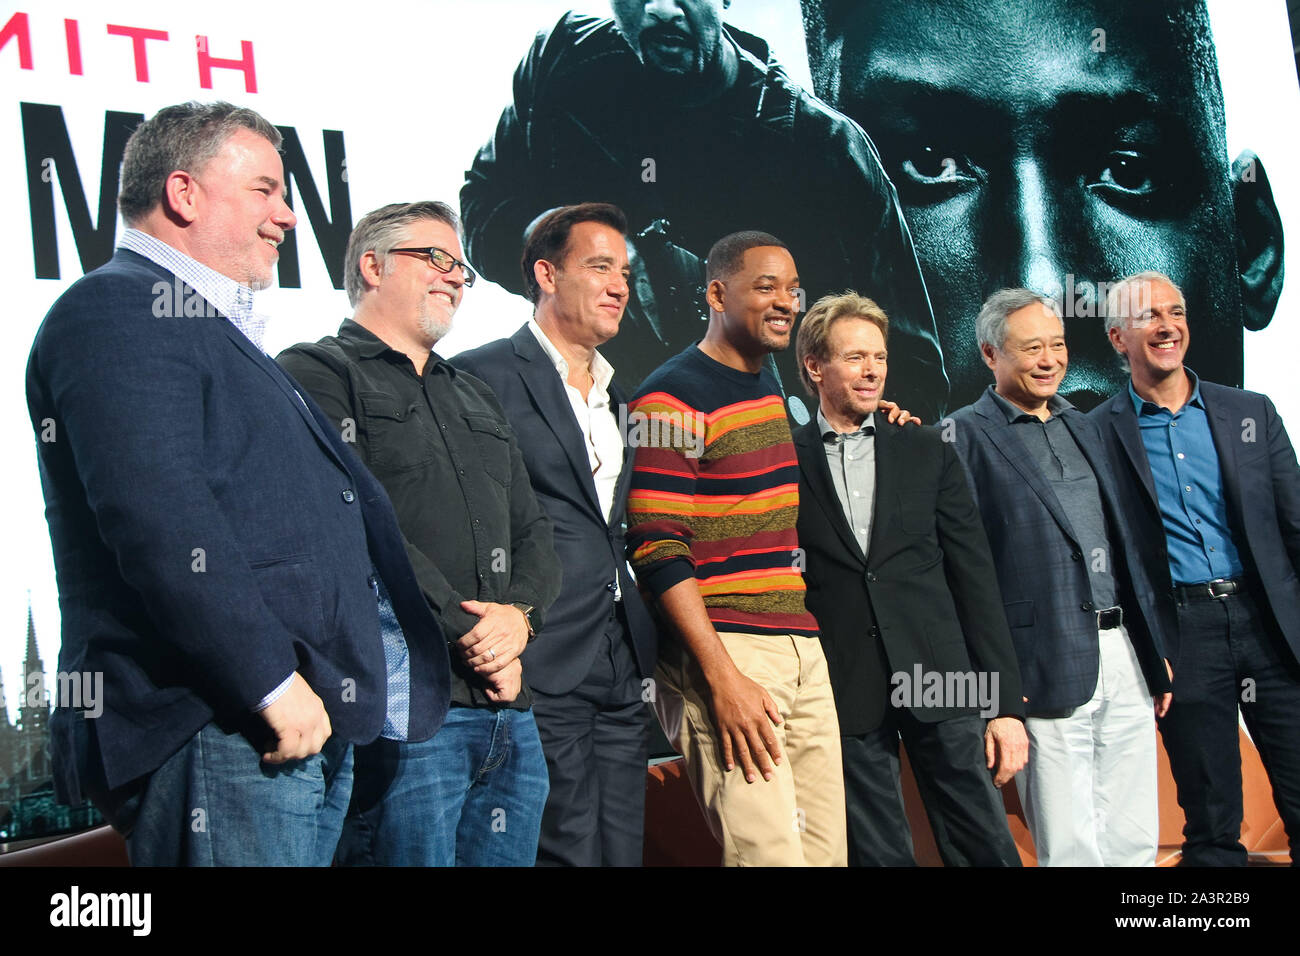 Guy Williams, Bill Westenhofer, Clive Owen, Will Smith, Jerry Bruckheimer, Ang Lee  10/04/2019 'Gemini Man' Press Conference held at the YouTube Space in Los Angeles, CA. Photo by I. Hasegawa / HNW/ PictureLux Stock Photo